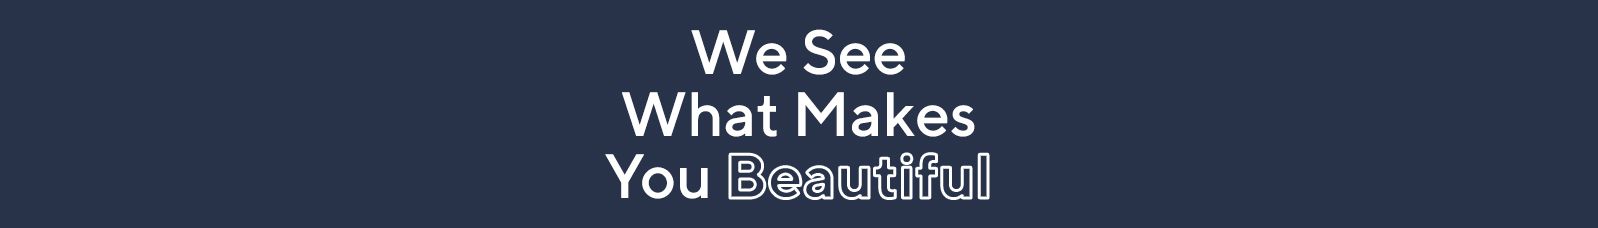 We See What Makes You Beautiful